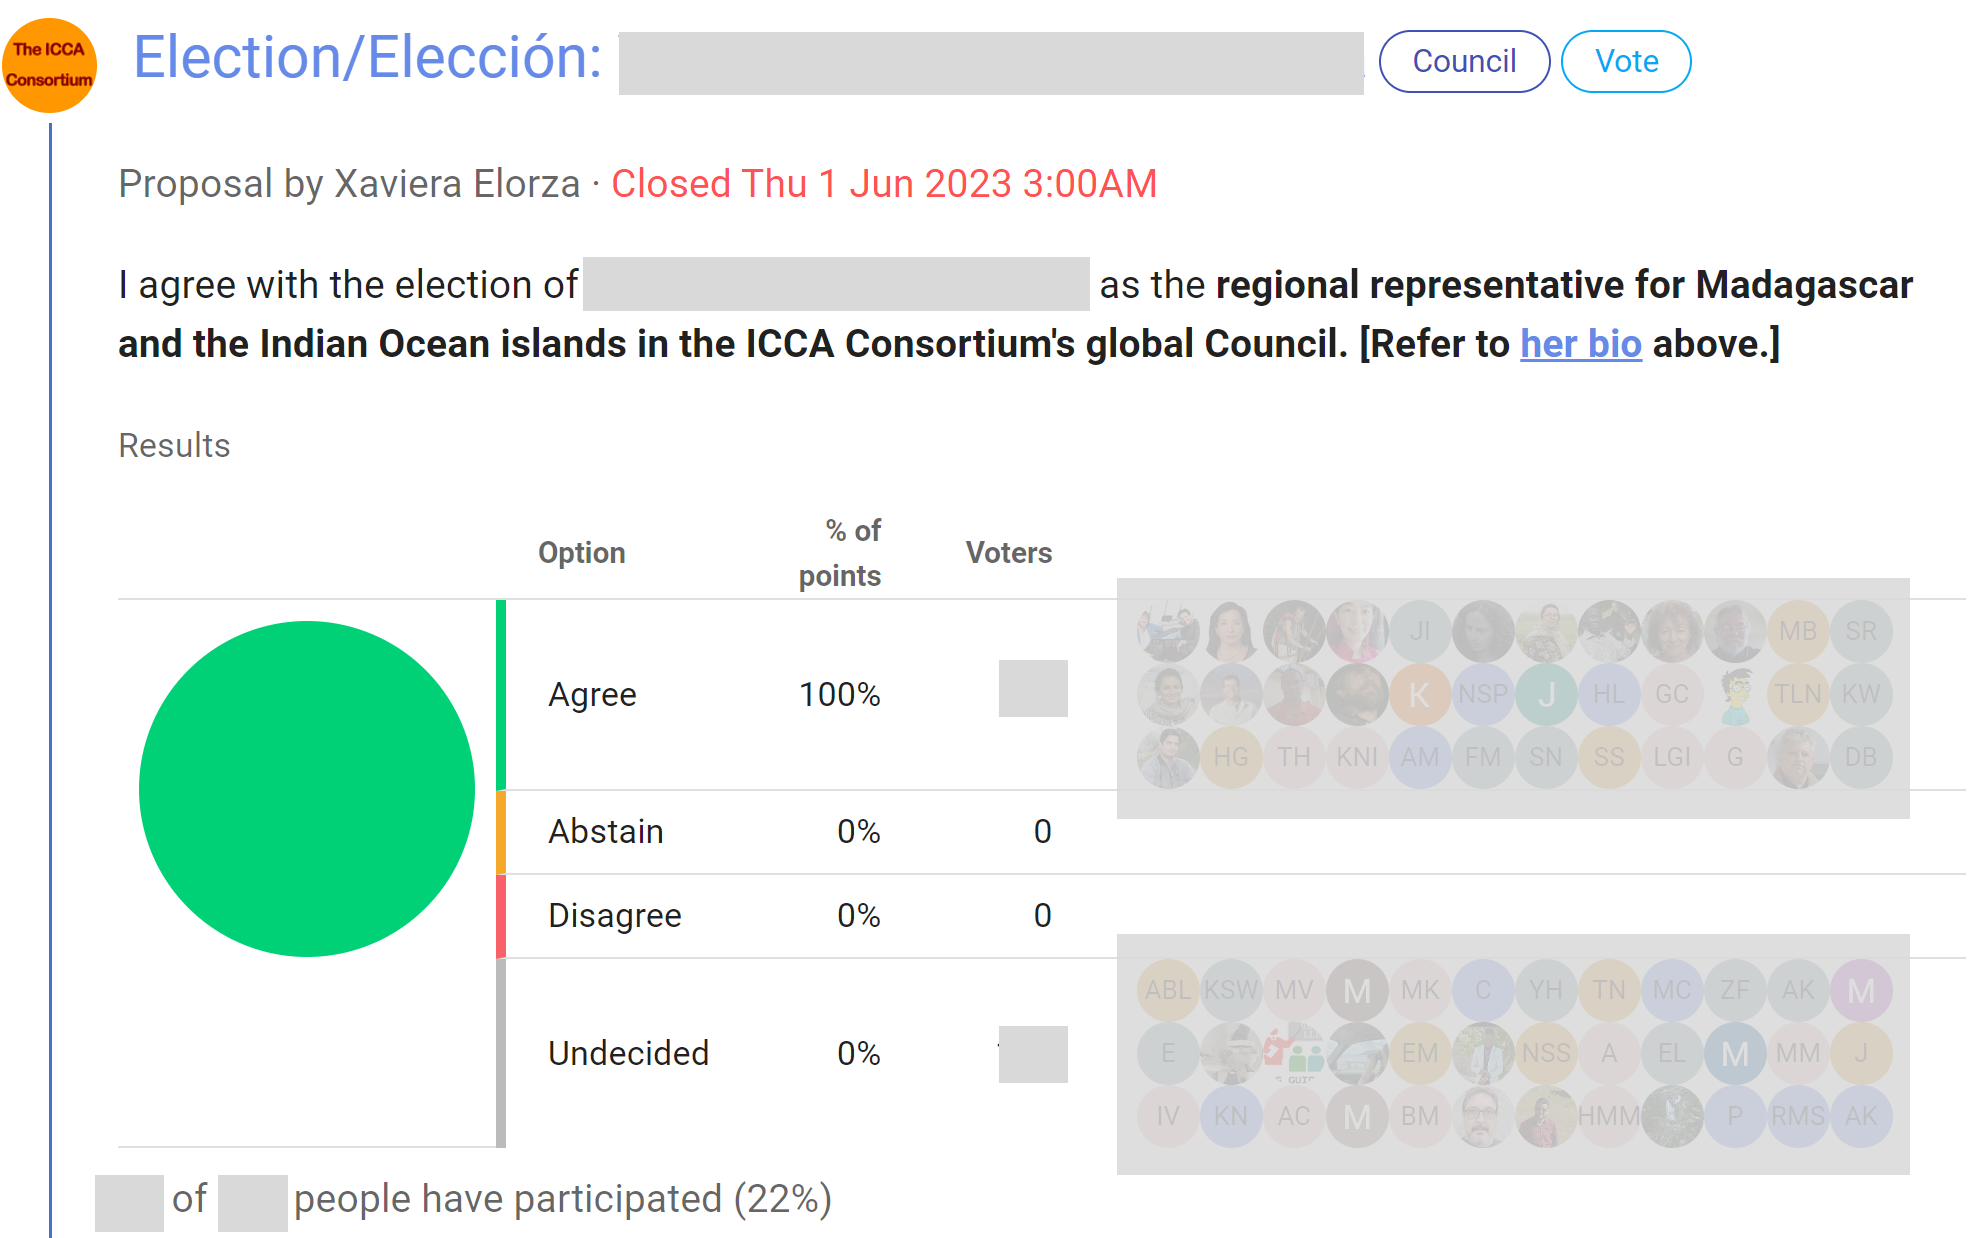 A redacted image of the ICCA election loomio proposal